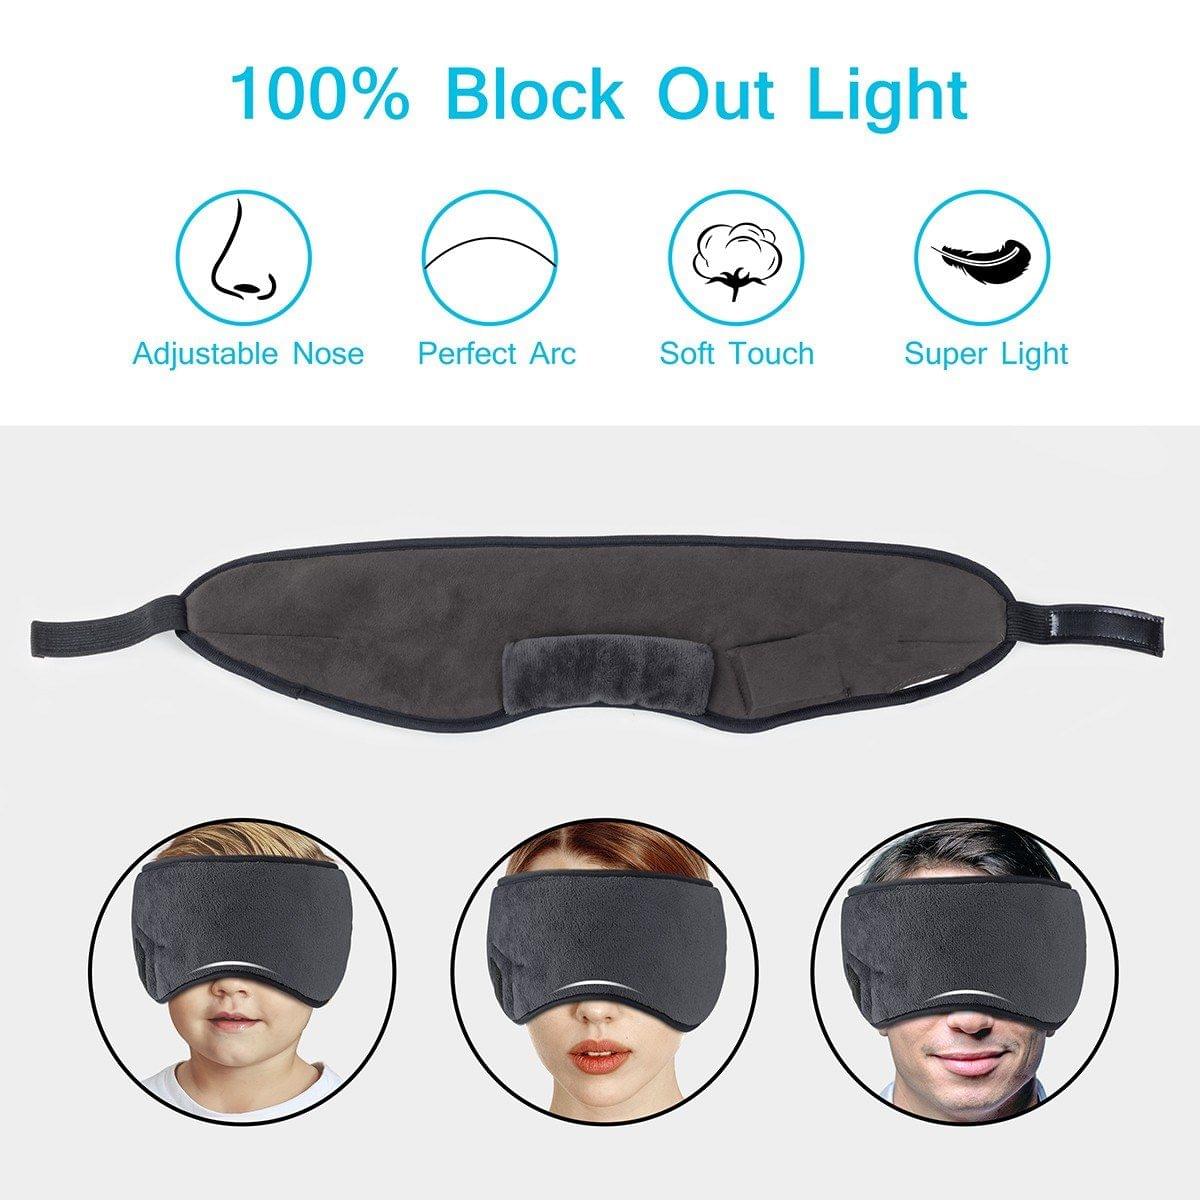 dodocool Wireless Multifunctional Sleeping Eye Mask with Stereo Sound Headphones Washable Music Eye Cover 4.2 Wireless Adjustable Headset with Built-in Speakers Microphone Handsfree for Travel and Sleep Chargeable Grey